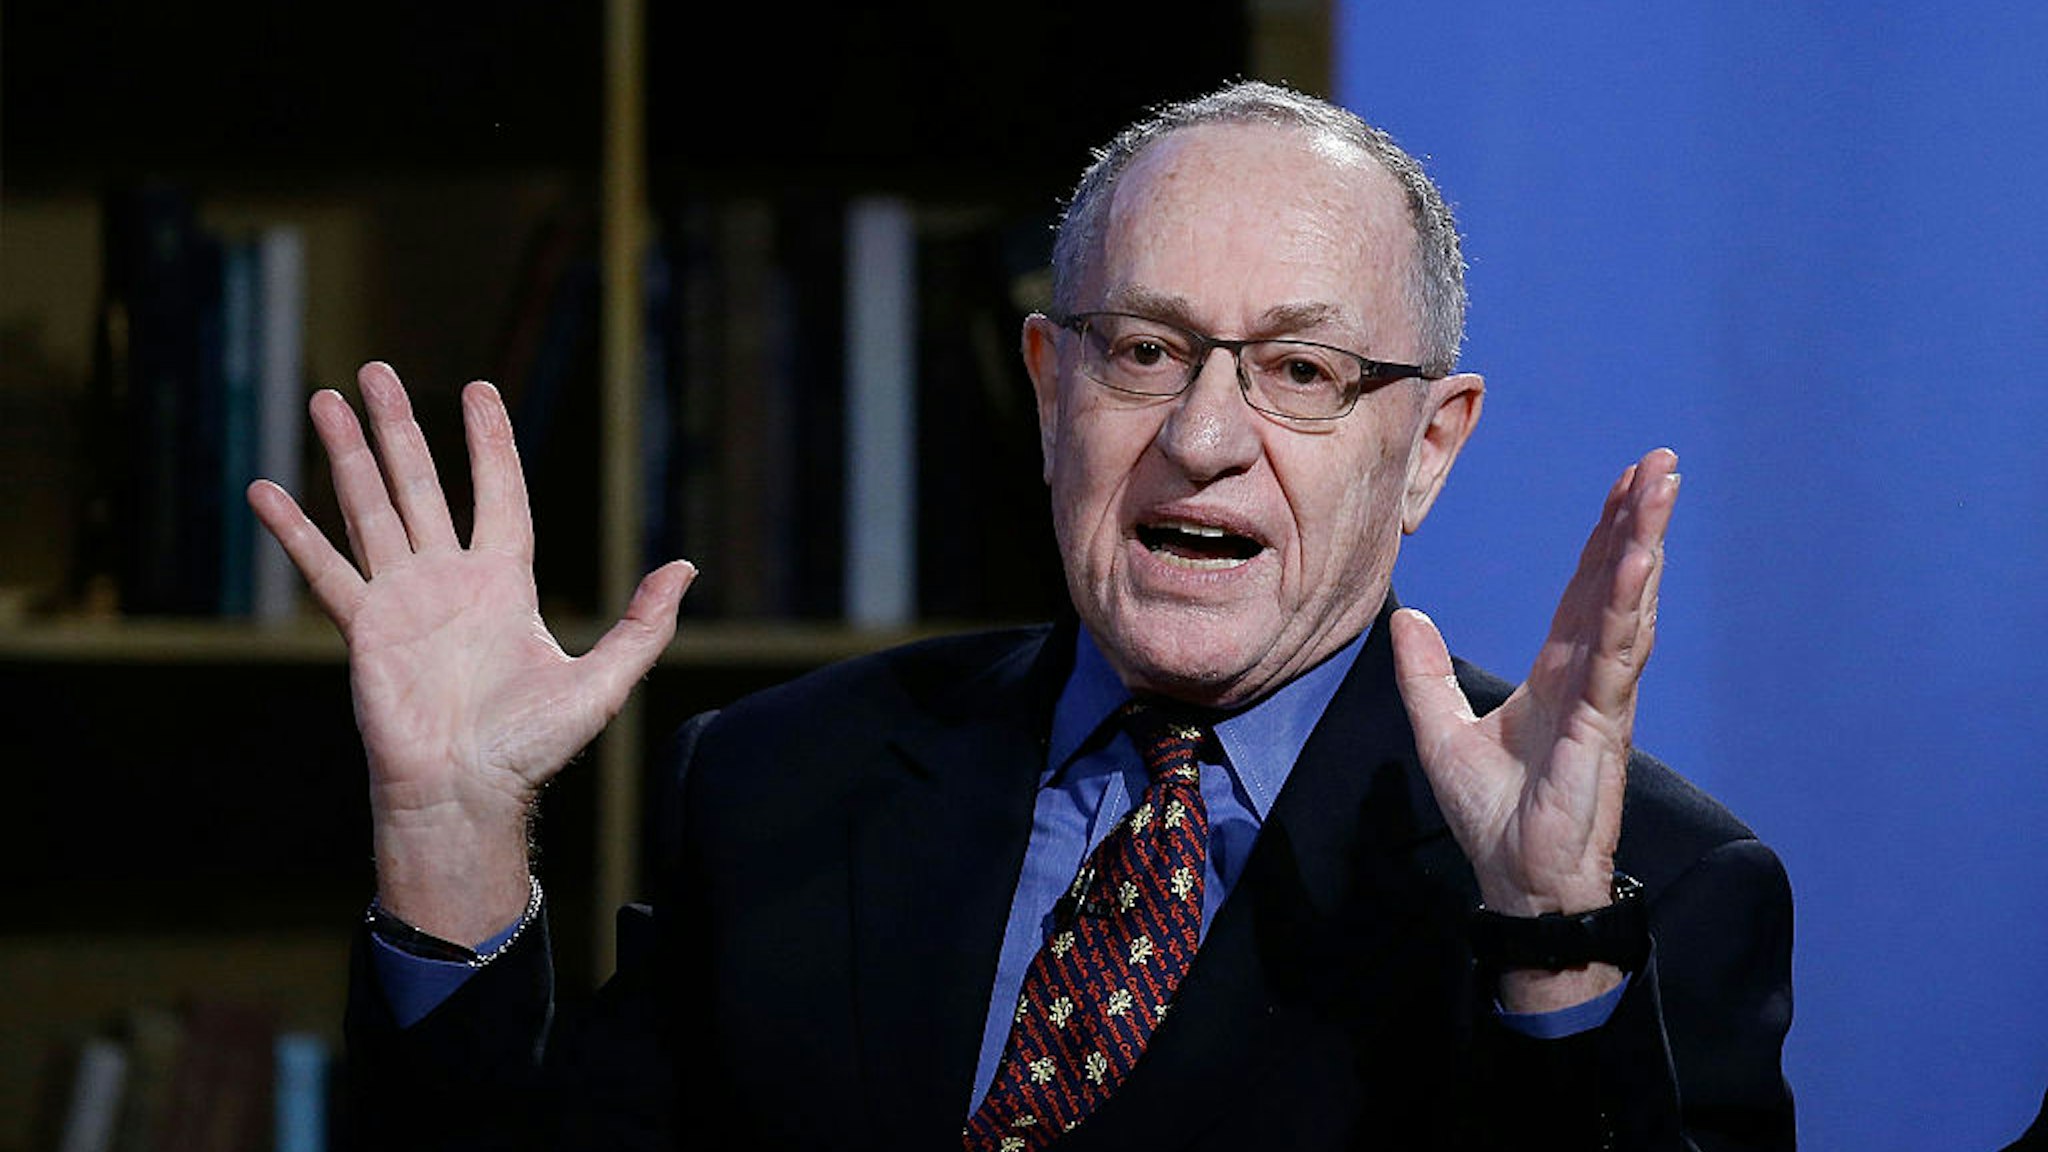 Alan Dershowitz attends Hulu Presents "Triumph's Election Special" produced by Funny Or Die at NEP Studios on February 3, 2016 in New York City.